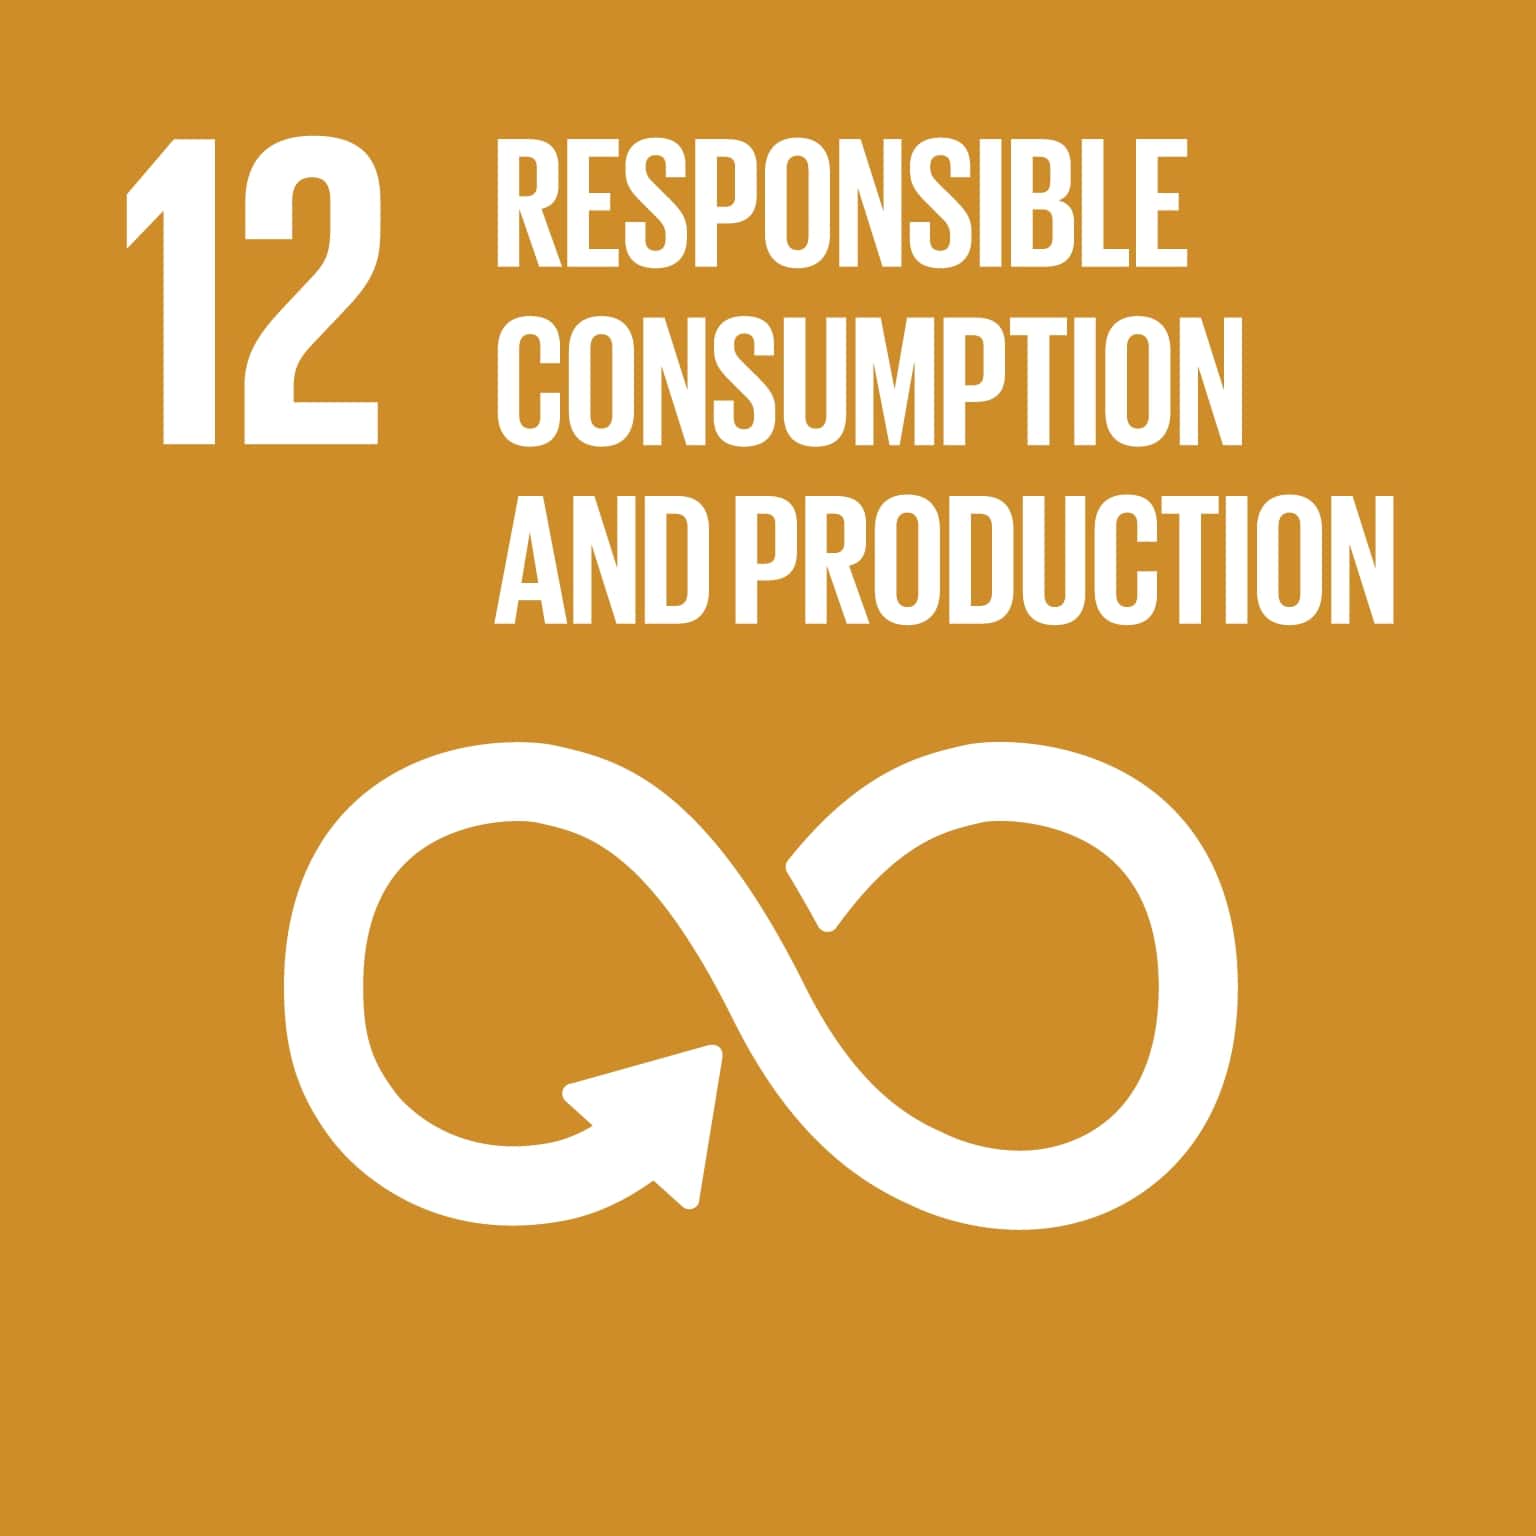 SDG 12. Responsible consumption and production